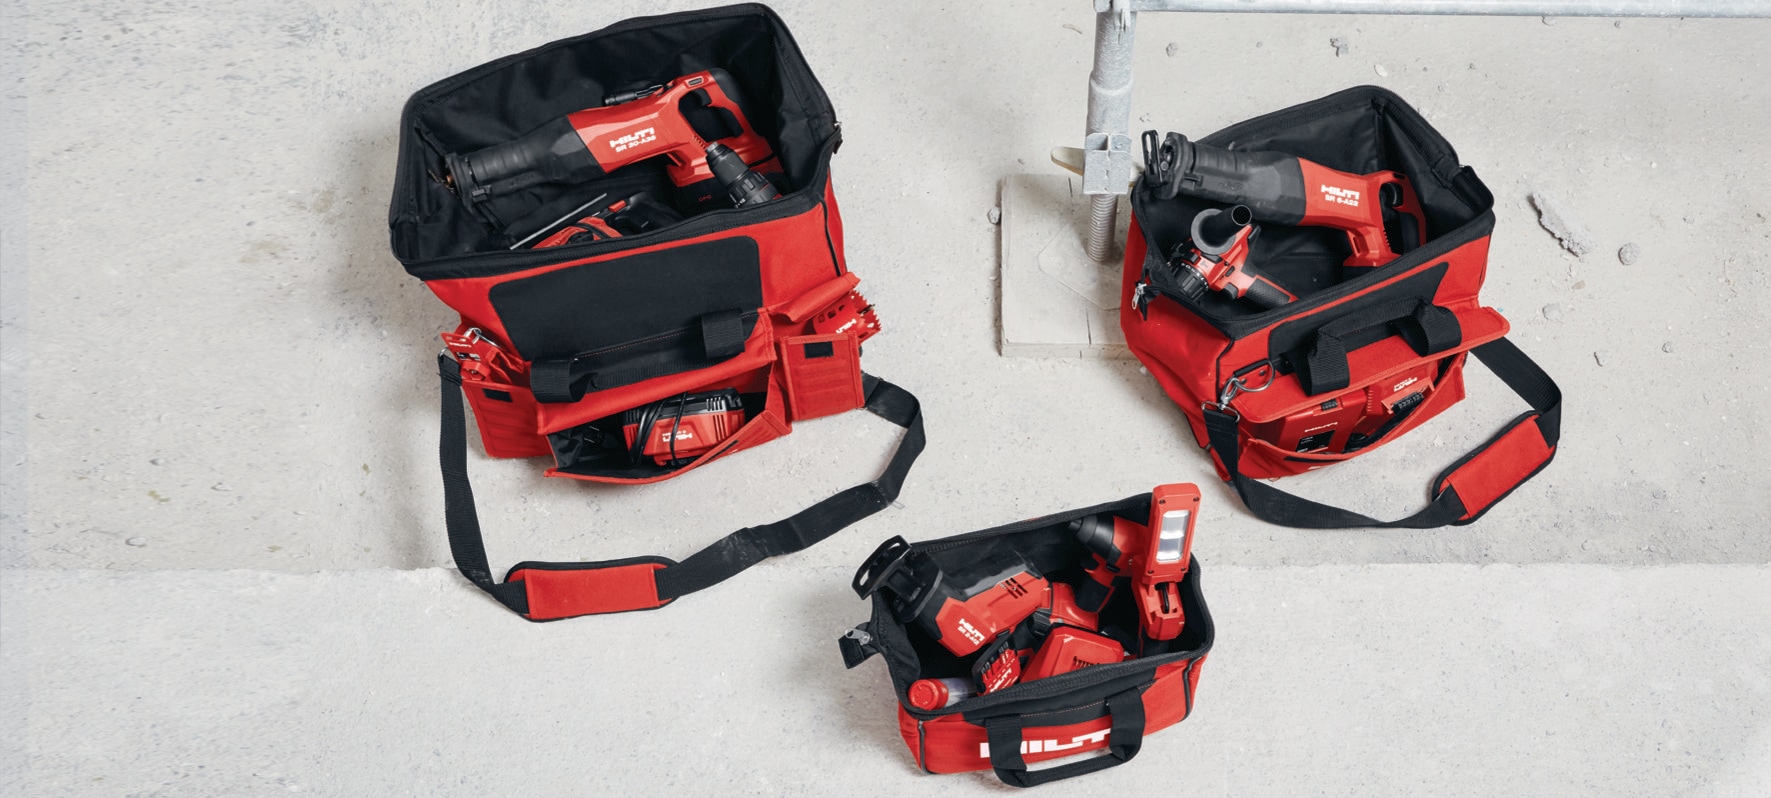 Hilti 3482502 SCW 18-A CPC 18-volt Cordless Circular Saw with Tool Bag -  Power Milling Machines - Amazon.com